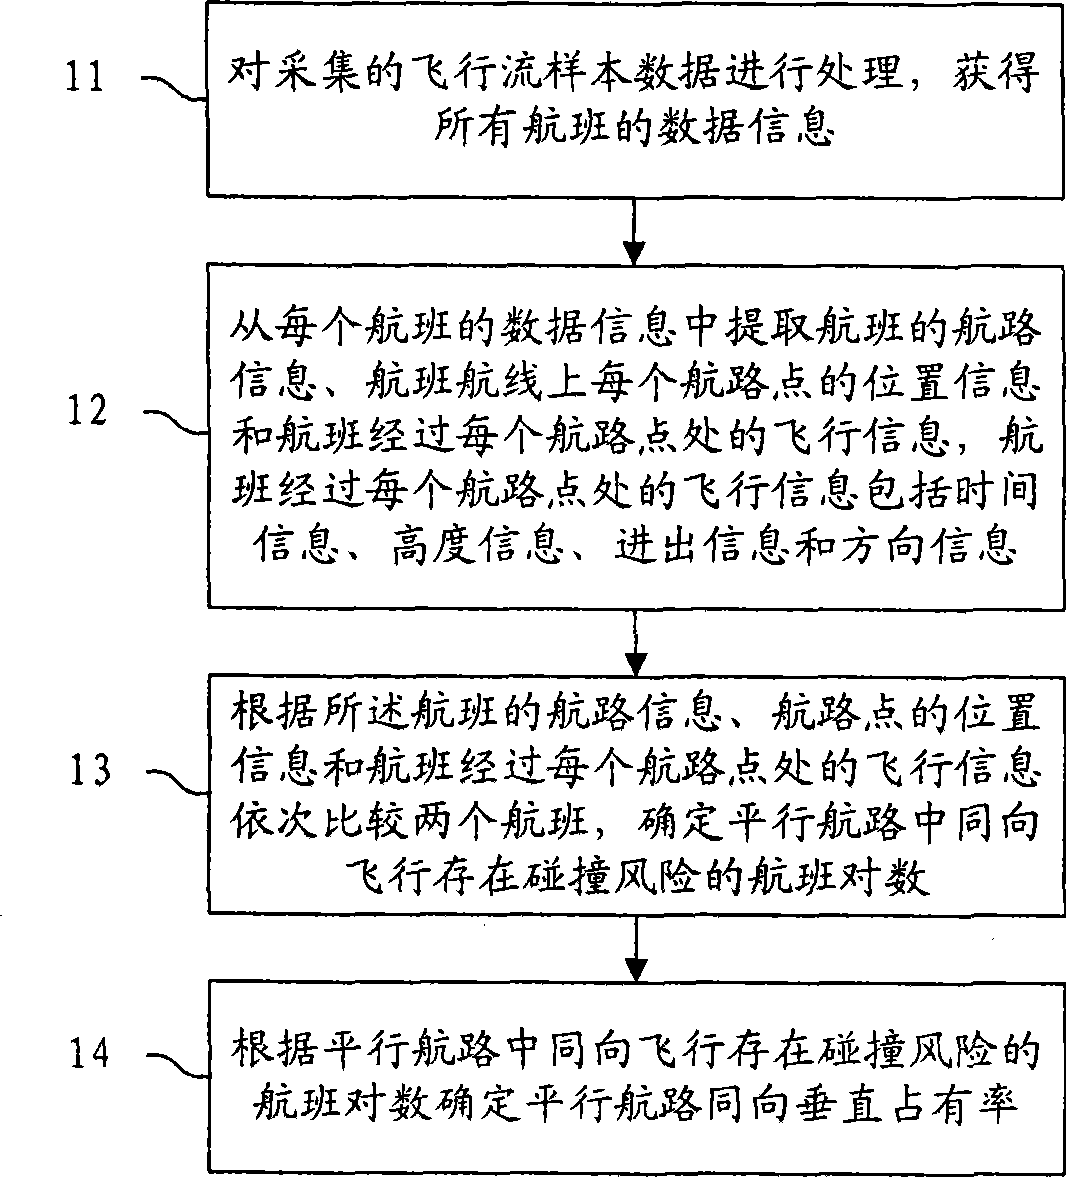 Method for obtaining airplane vertical occupation ratio